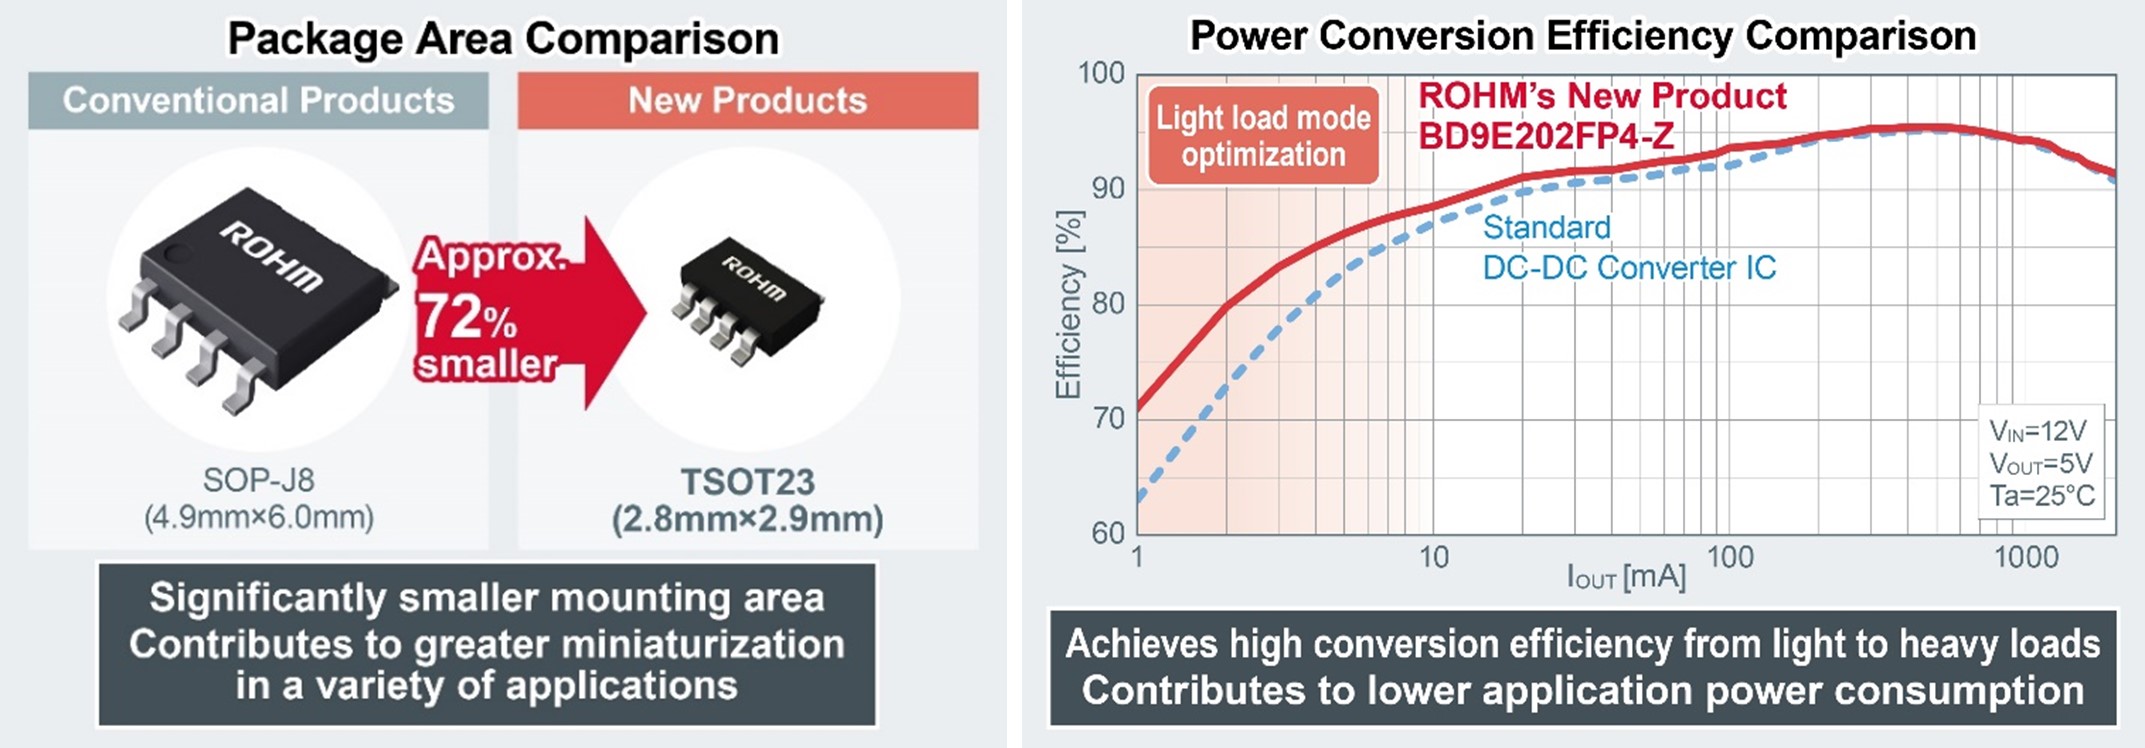 ROHM Products vs. Conventional Products: Package Area and Power Conversion Efficiency Comparisons